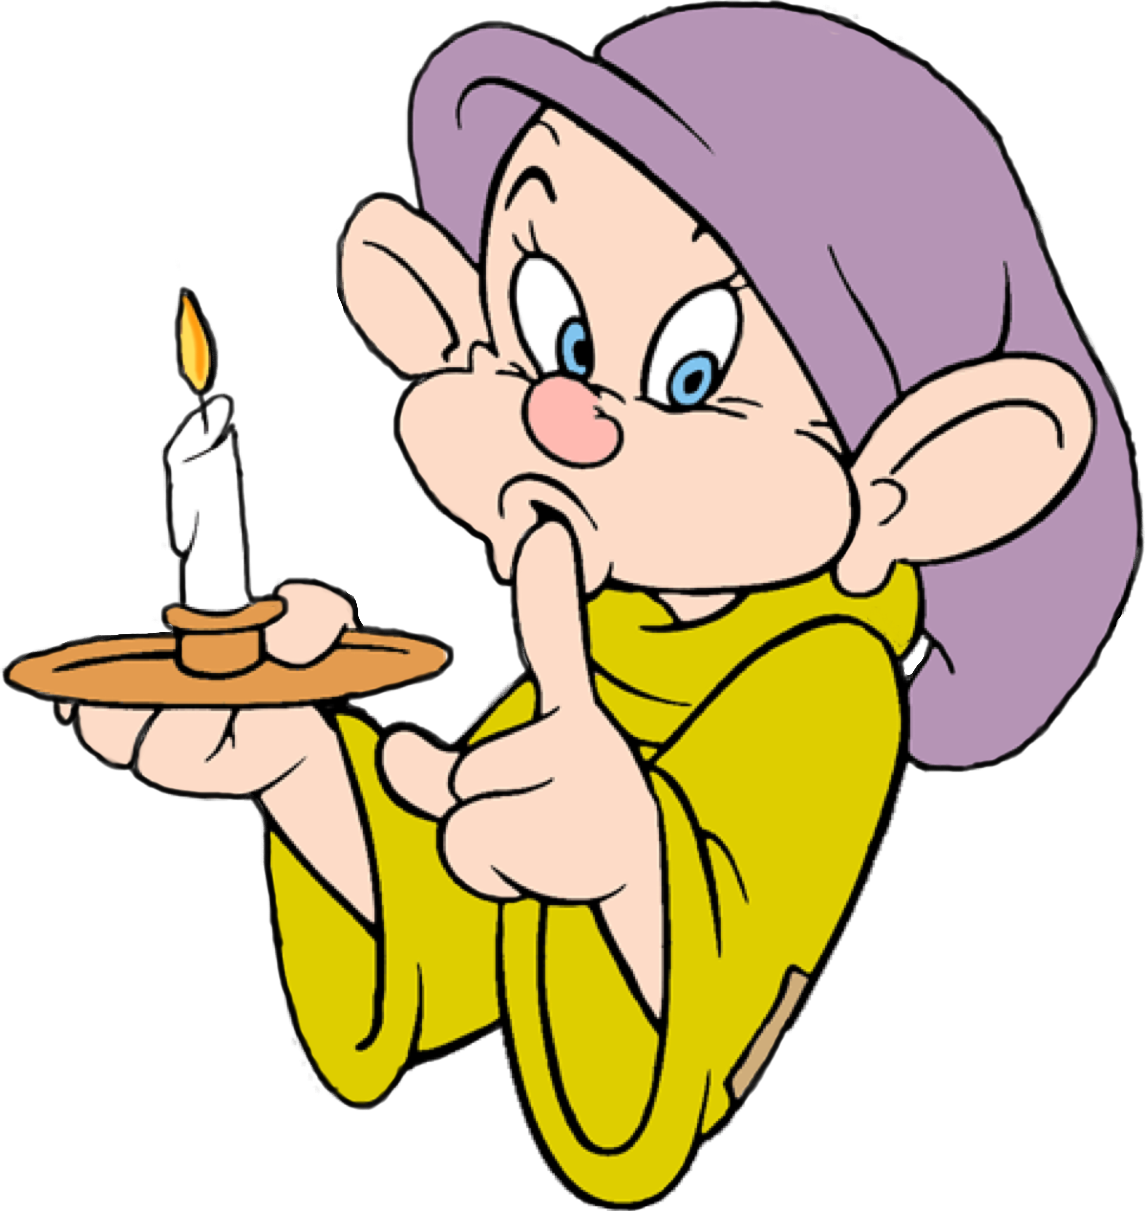 This visual is about sccandles candles dopey candle freetoedit #dopey #cand...